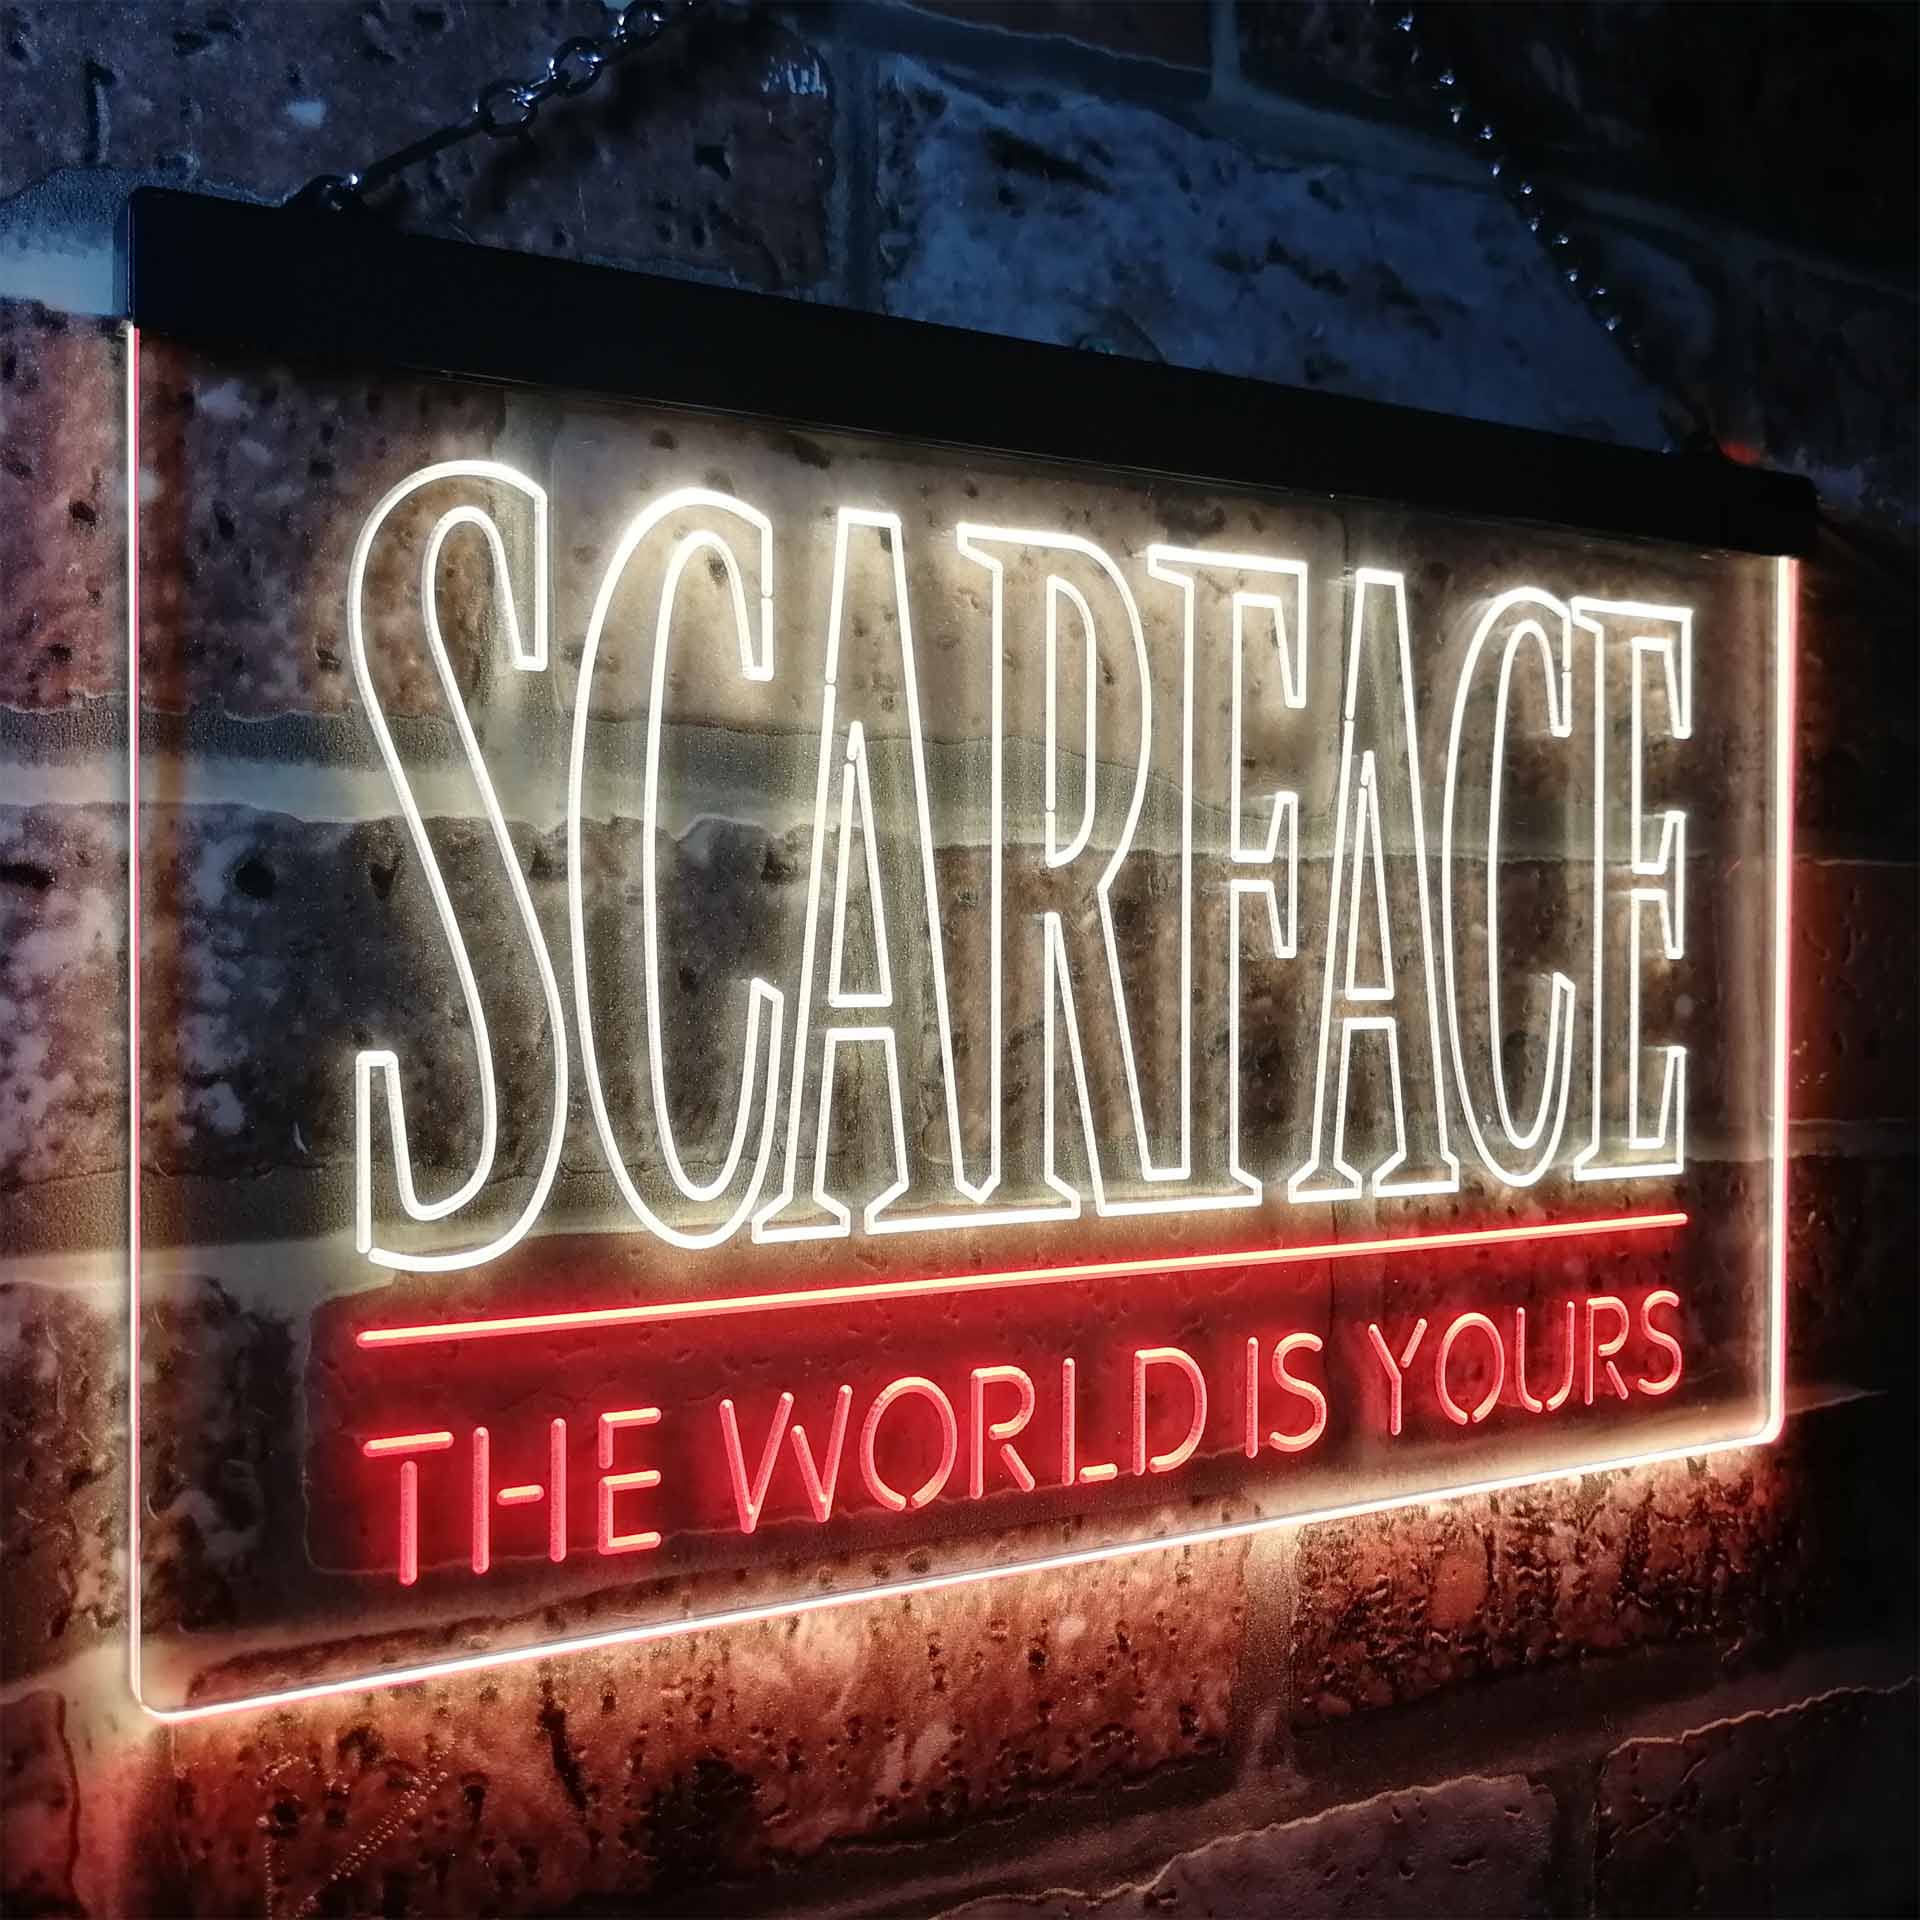 Scarface The World is Yours LED Neon Sign